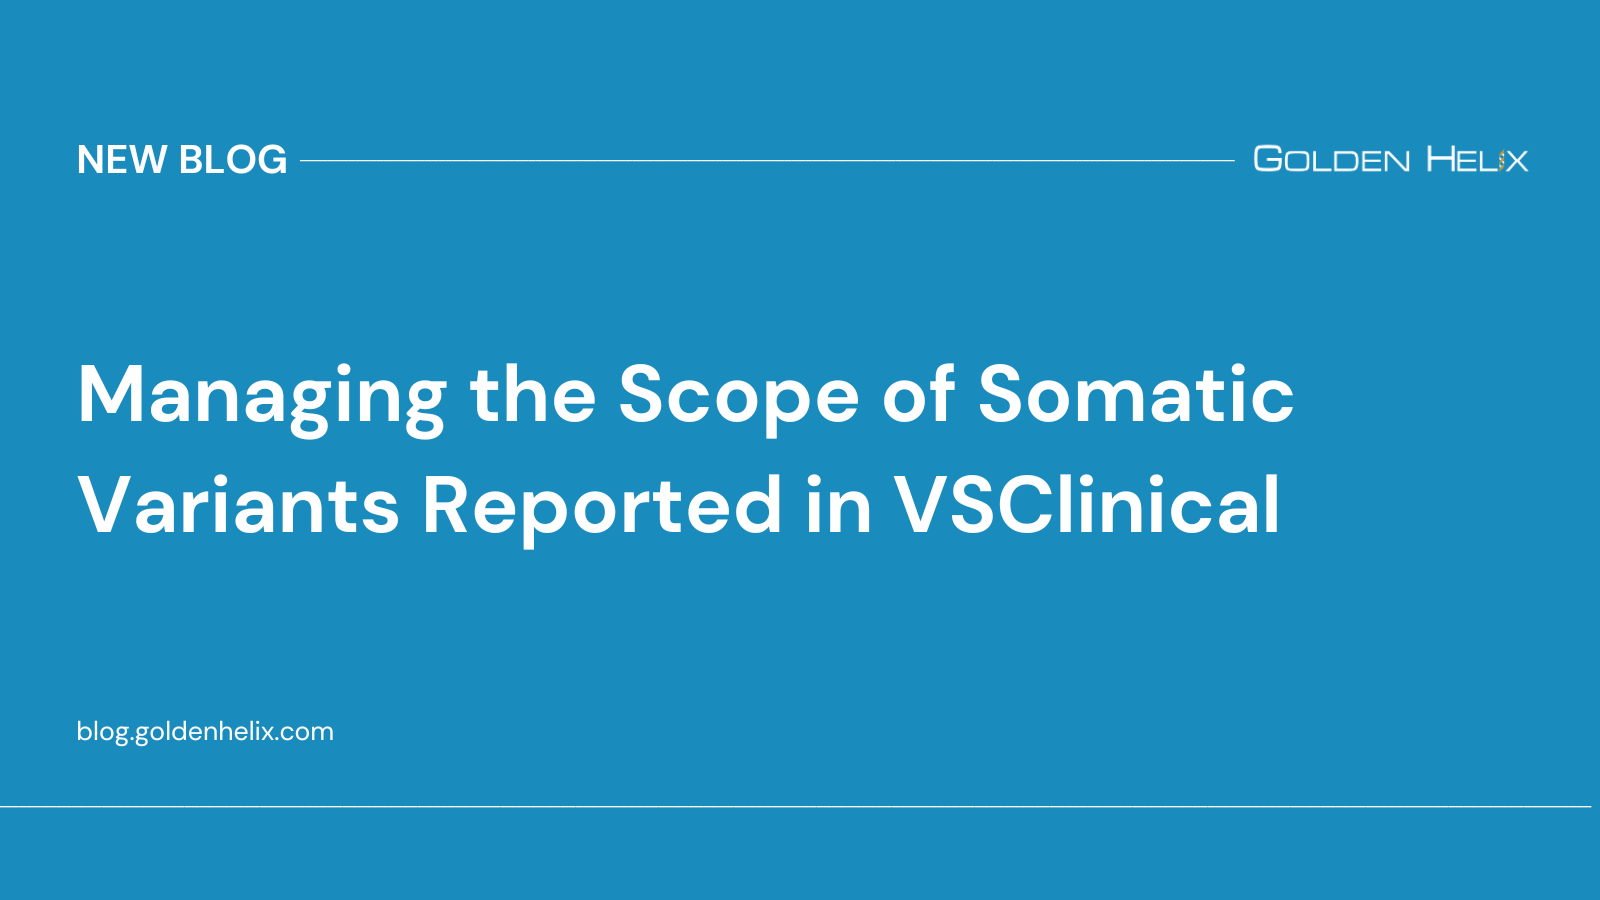 Managing the Scope of Somatic Variants Reported in VSClinical